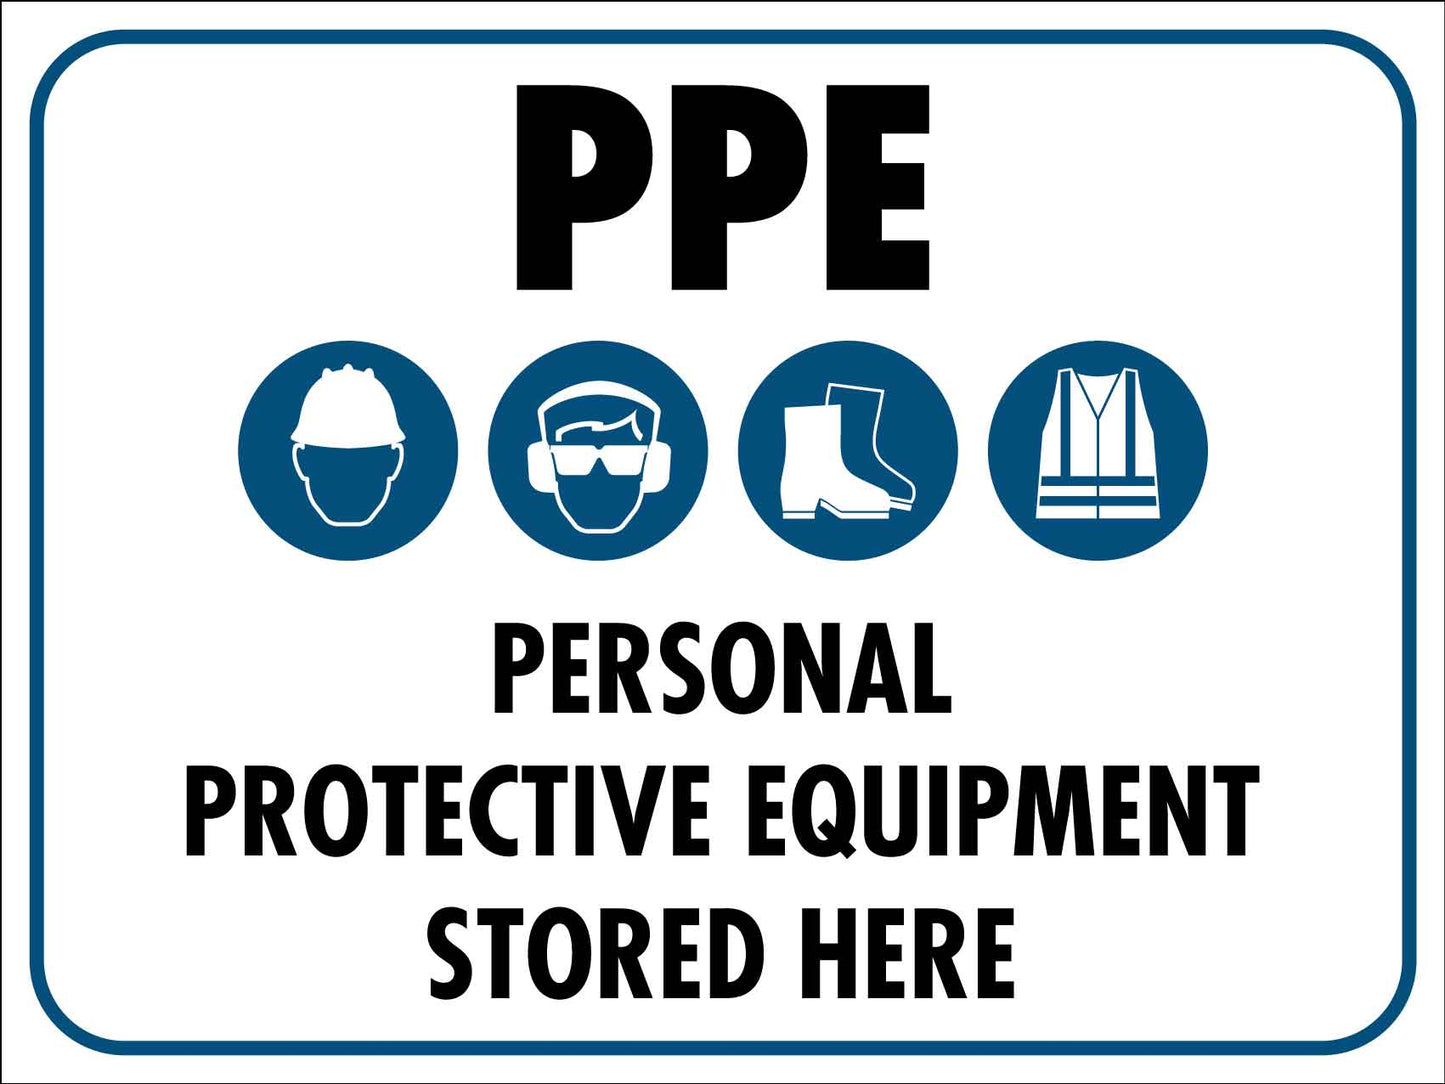 PPE Personal Protective Equipment Stored Here Symbol Sign